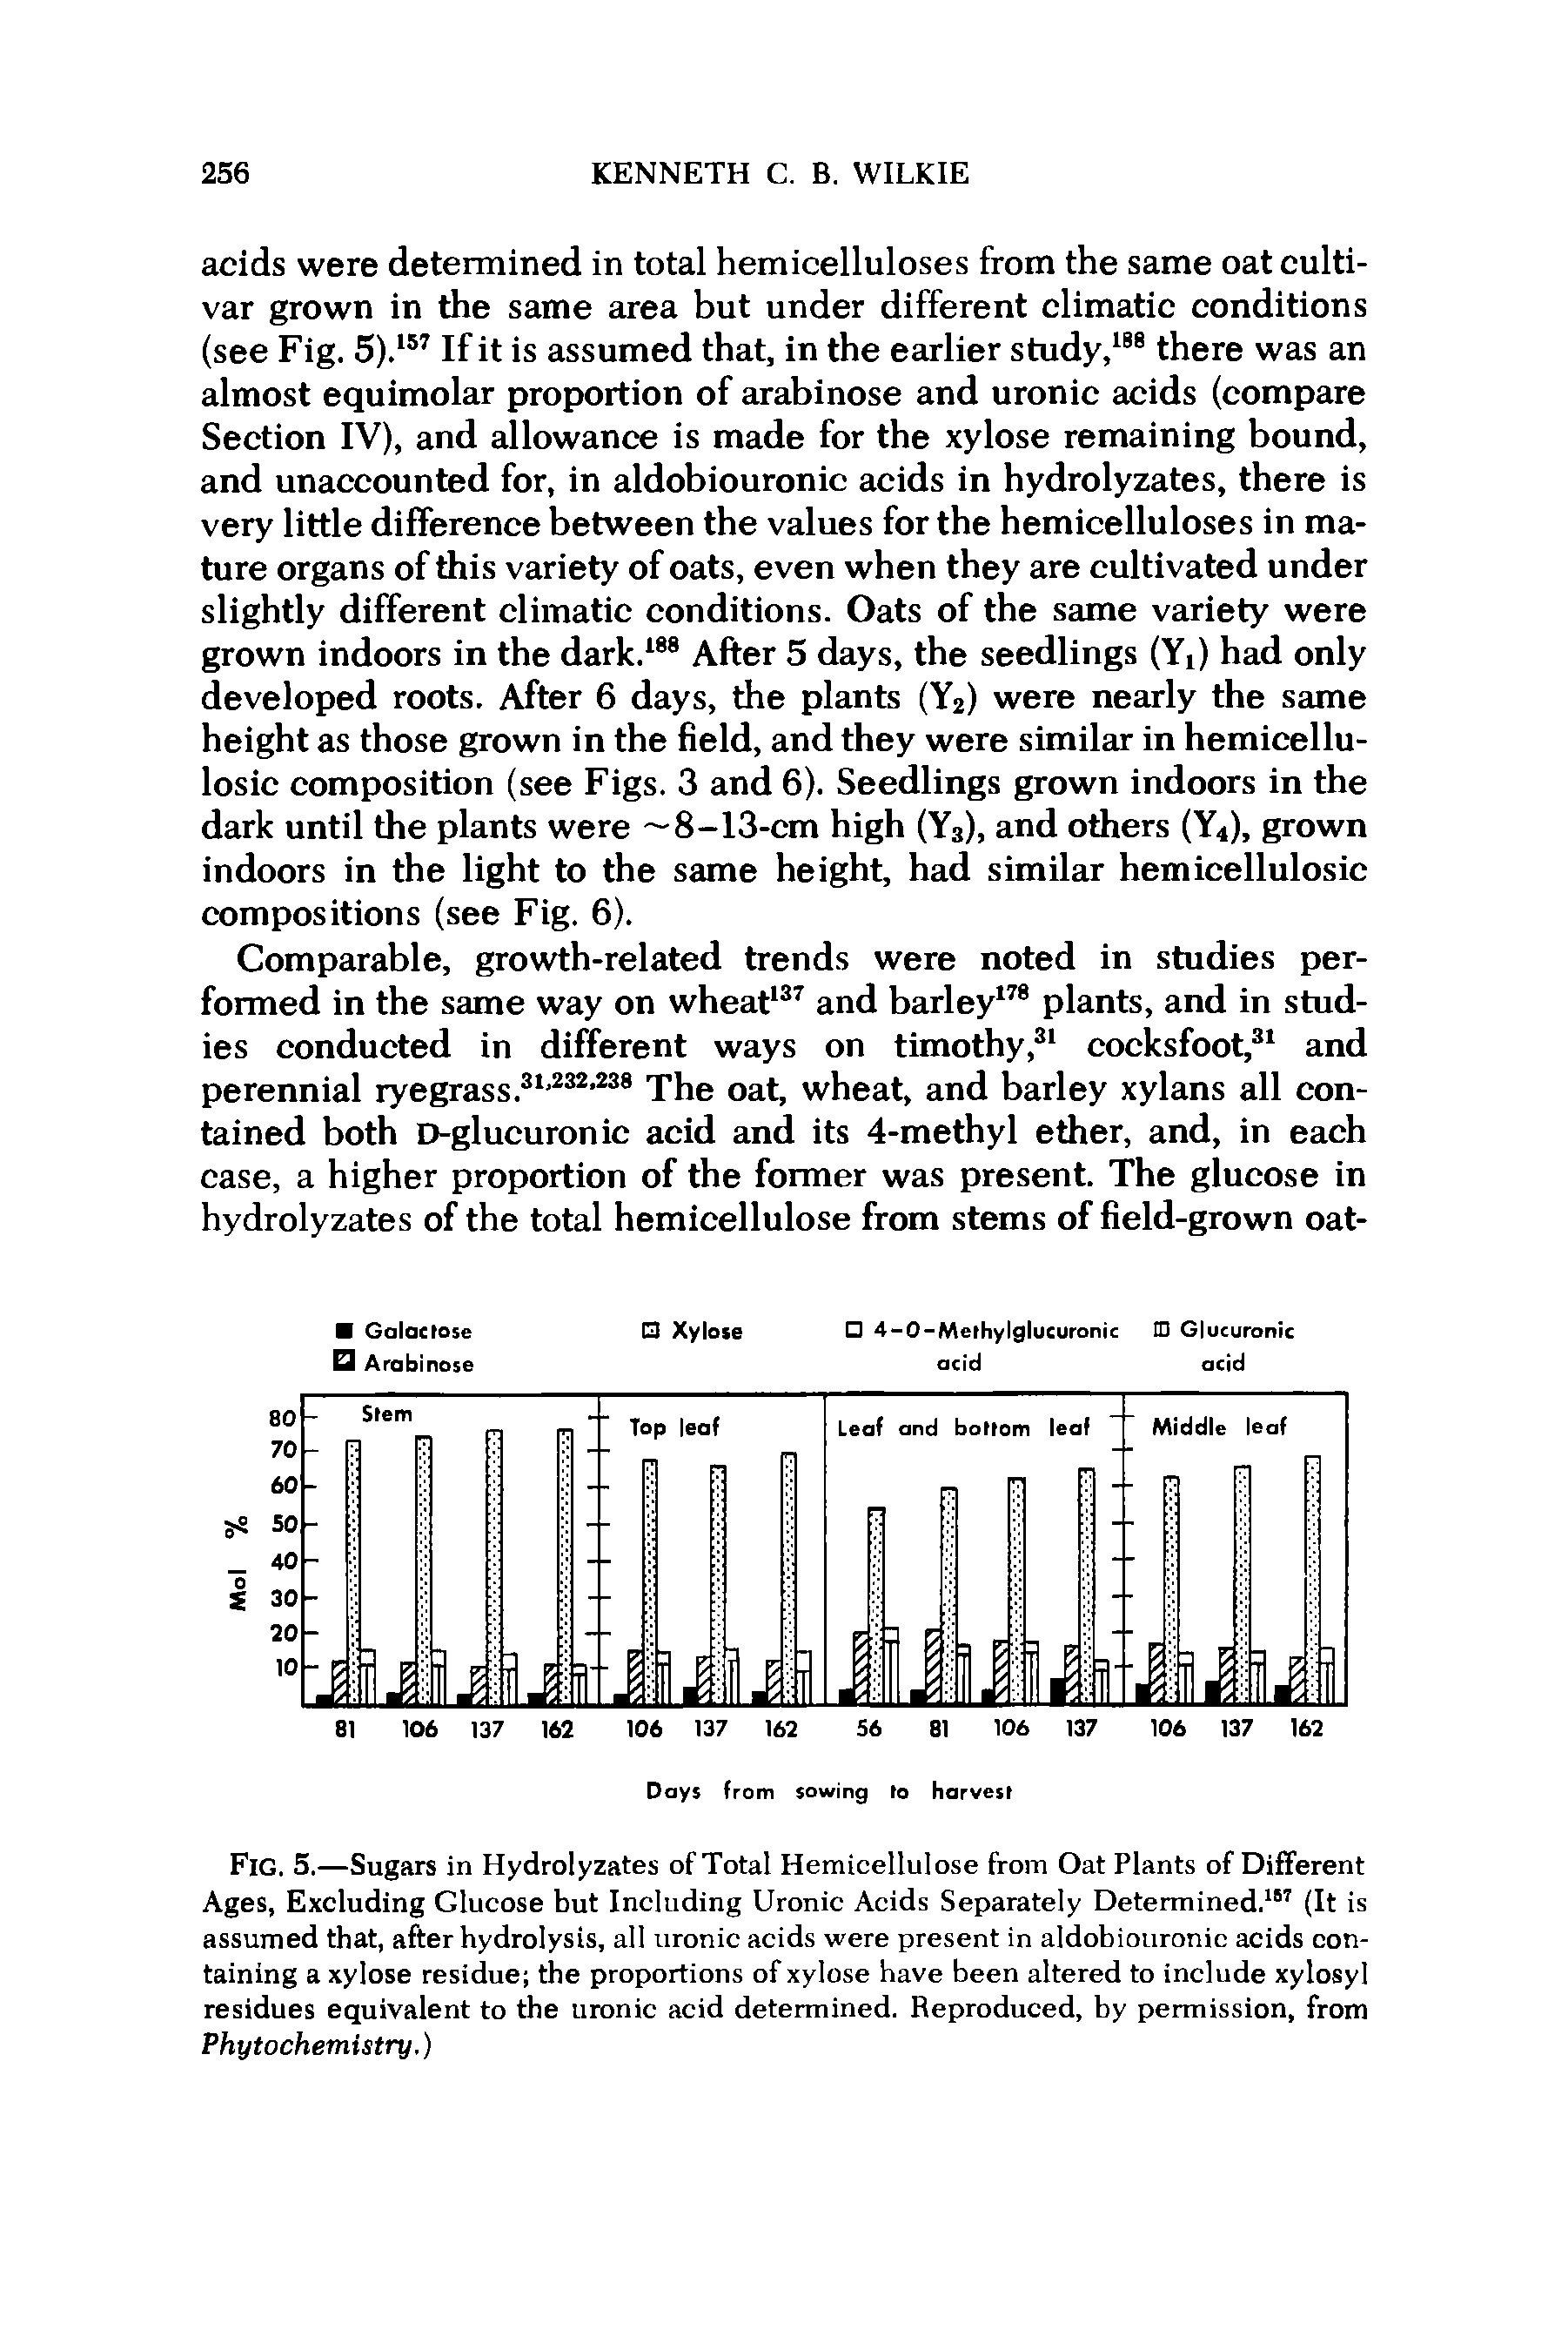 Fig. 5.—Sugars in Hydrolyzates of Total Hemicellulose from Oat Plants of Different Ages, Excluding Glucose but Including Uronic Acids Separately Determined.167 (It is assumed that, after hydrolysis, all uronic acids were present in aldobiouronic acids containing a xylose residue the proportions of xylose have been altered to include xylosyl residues equivalent to the uronic acid determined. Reproduced, by permission, from Phytochemistry.)...